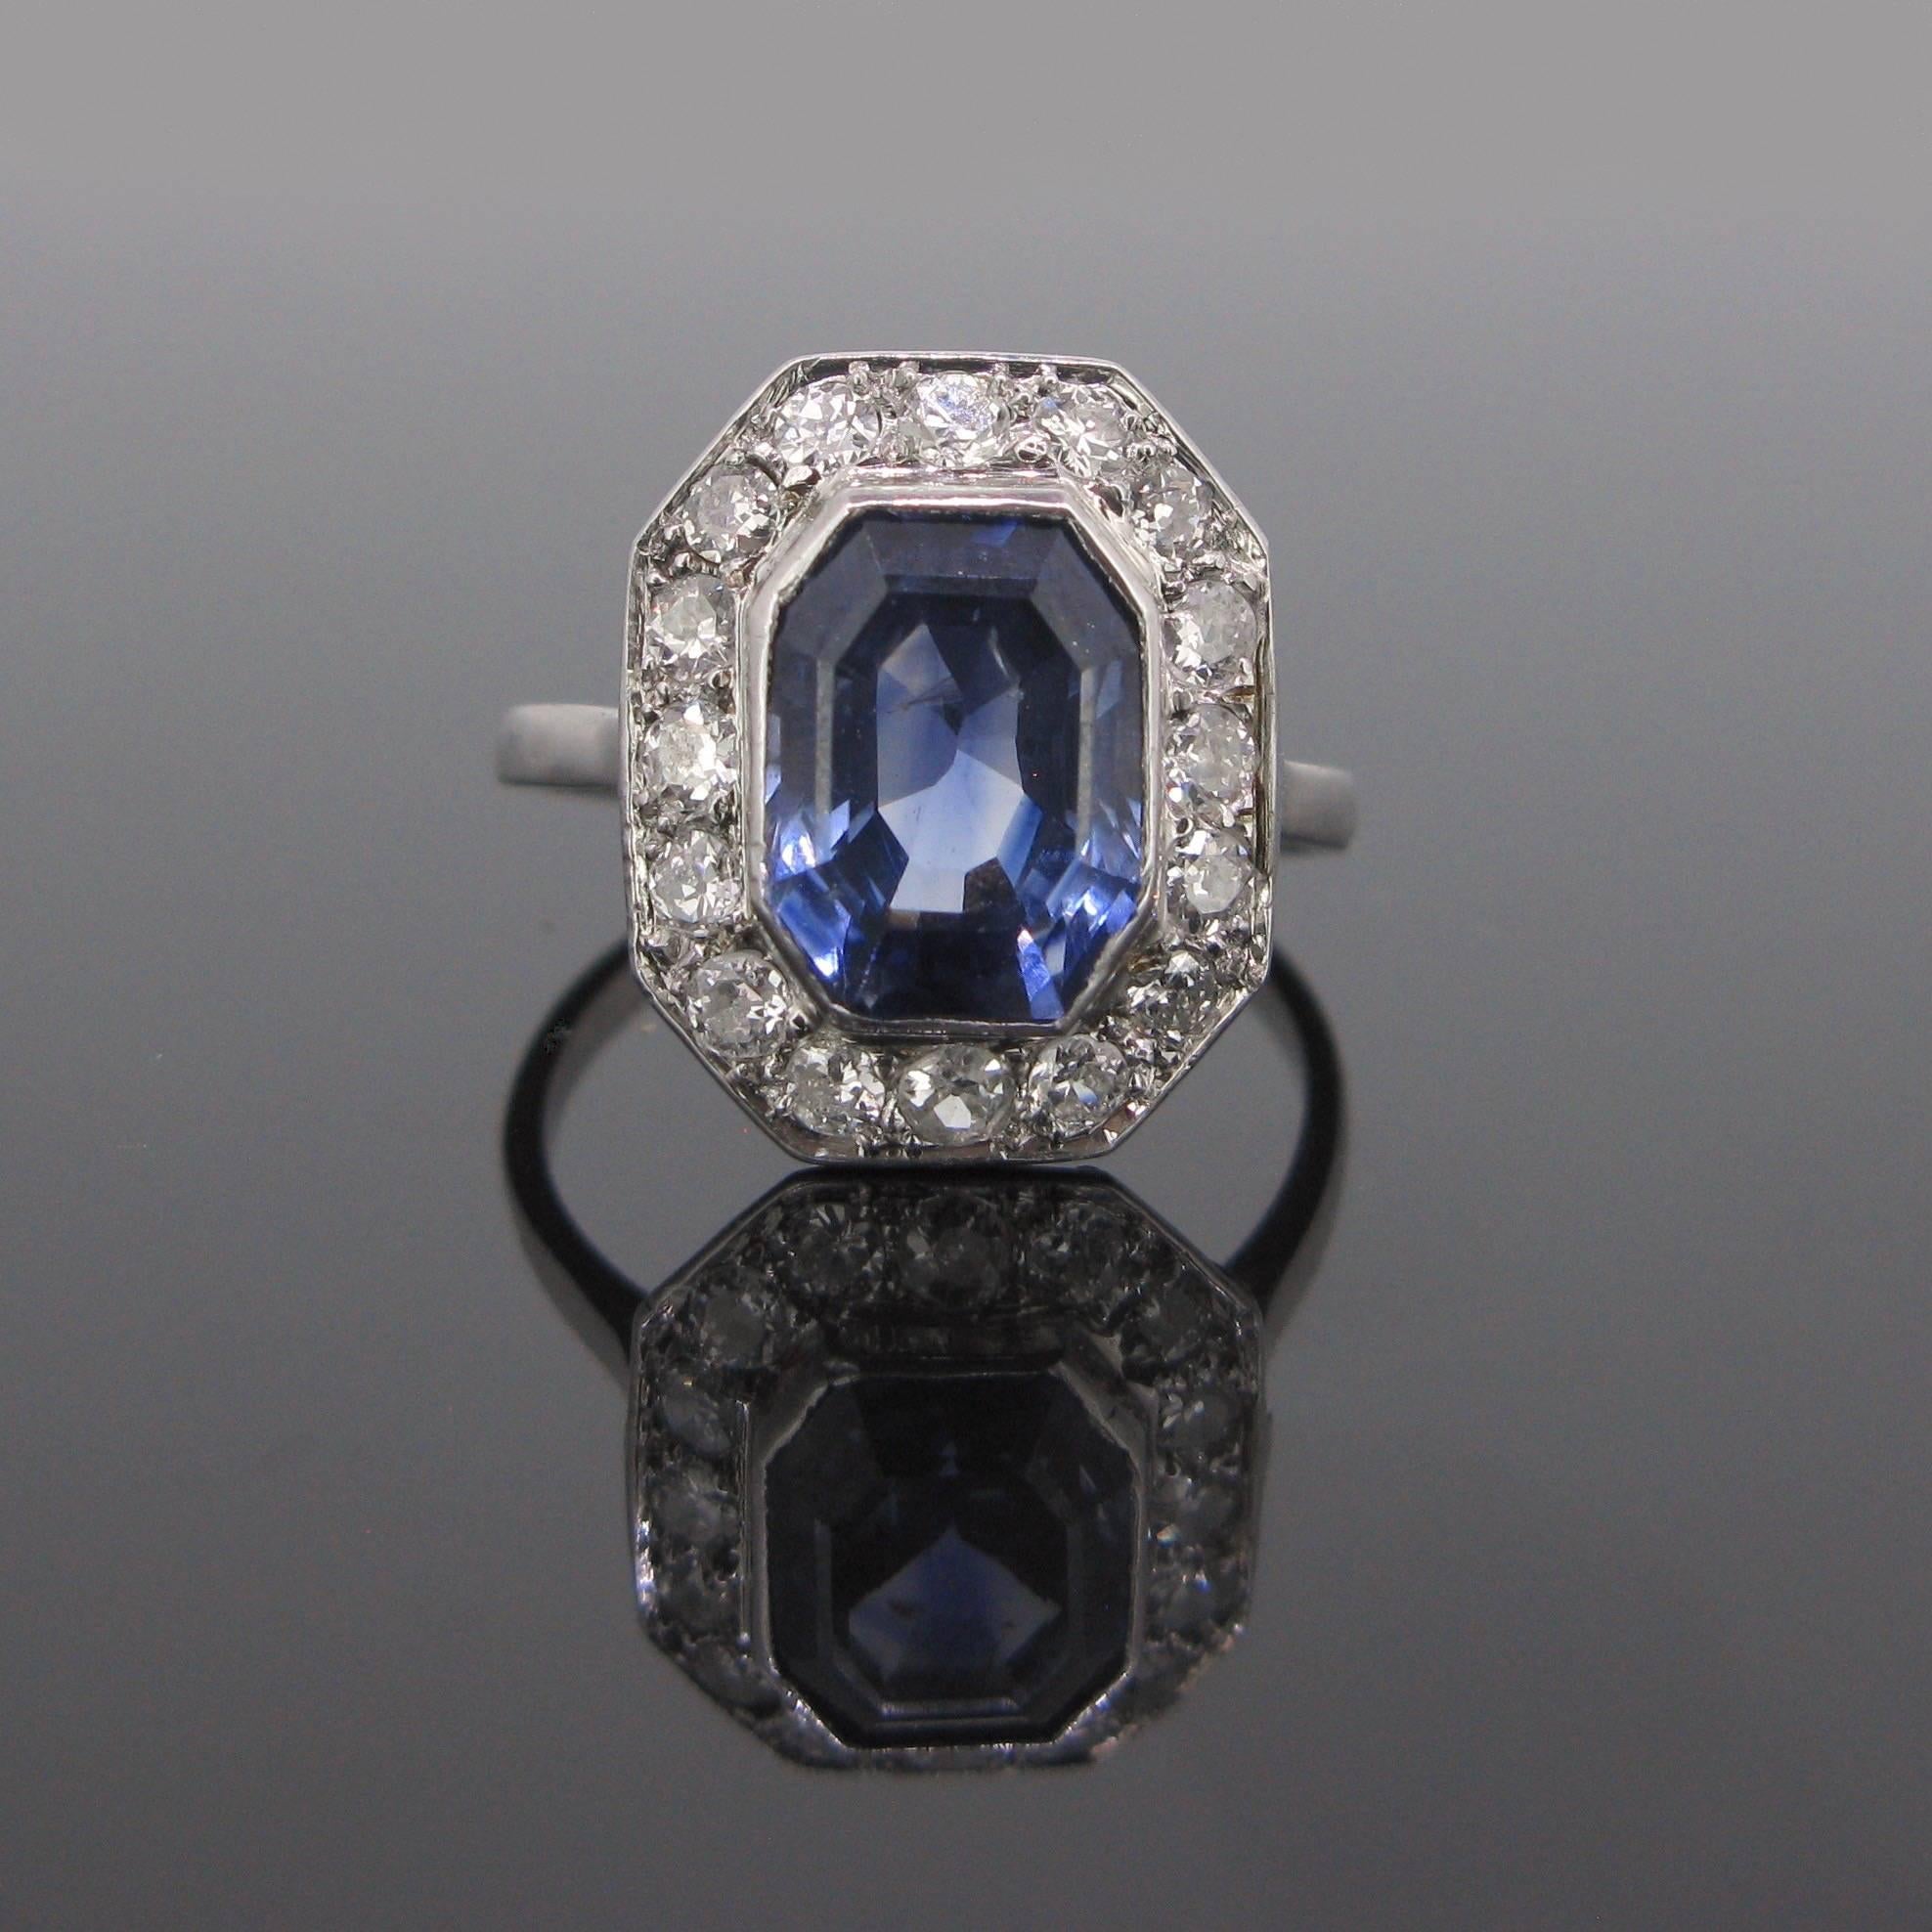 This ravishing ring features a beautiful navy blue sapphire surrounded with diamonds. The natural sapphire has a rectangular step cut, it weighs around 5.30ct and it is from Ceylon. The 16 diamonds weighs approximately 1ct in total (H/VS-SI).
The